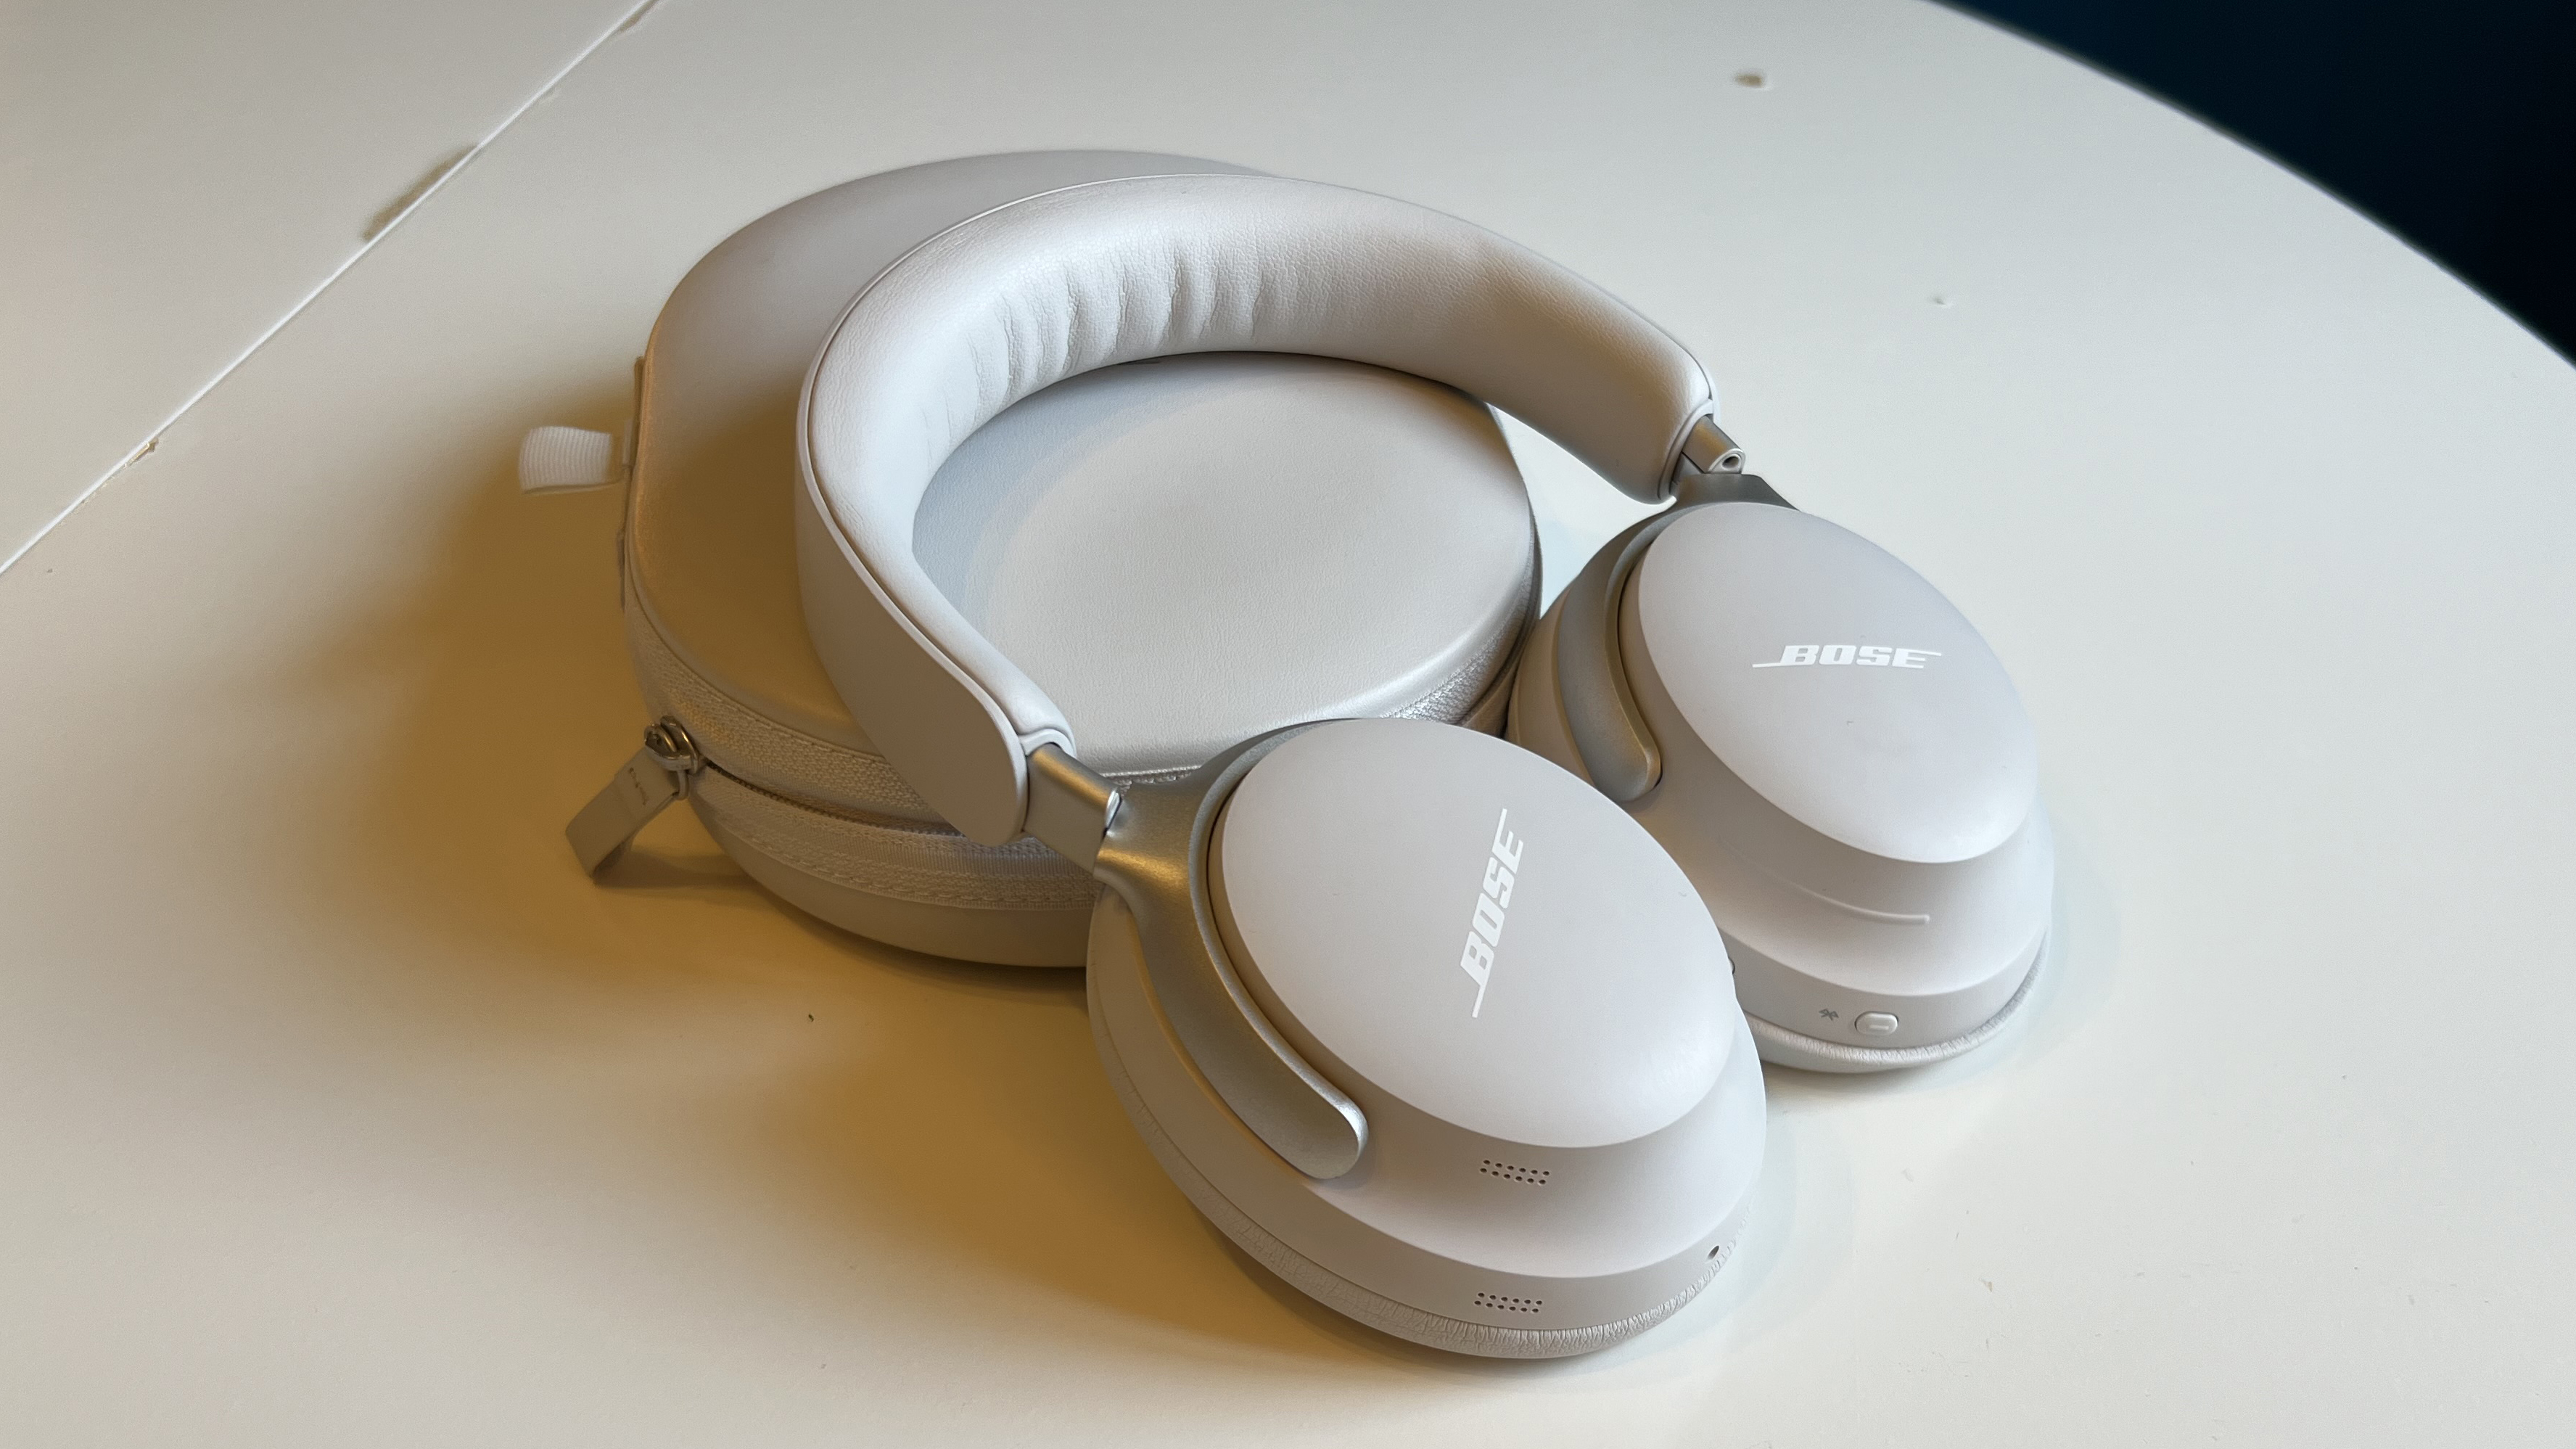 Bose QuietComfort Ultra Headphones on a white table, with their case